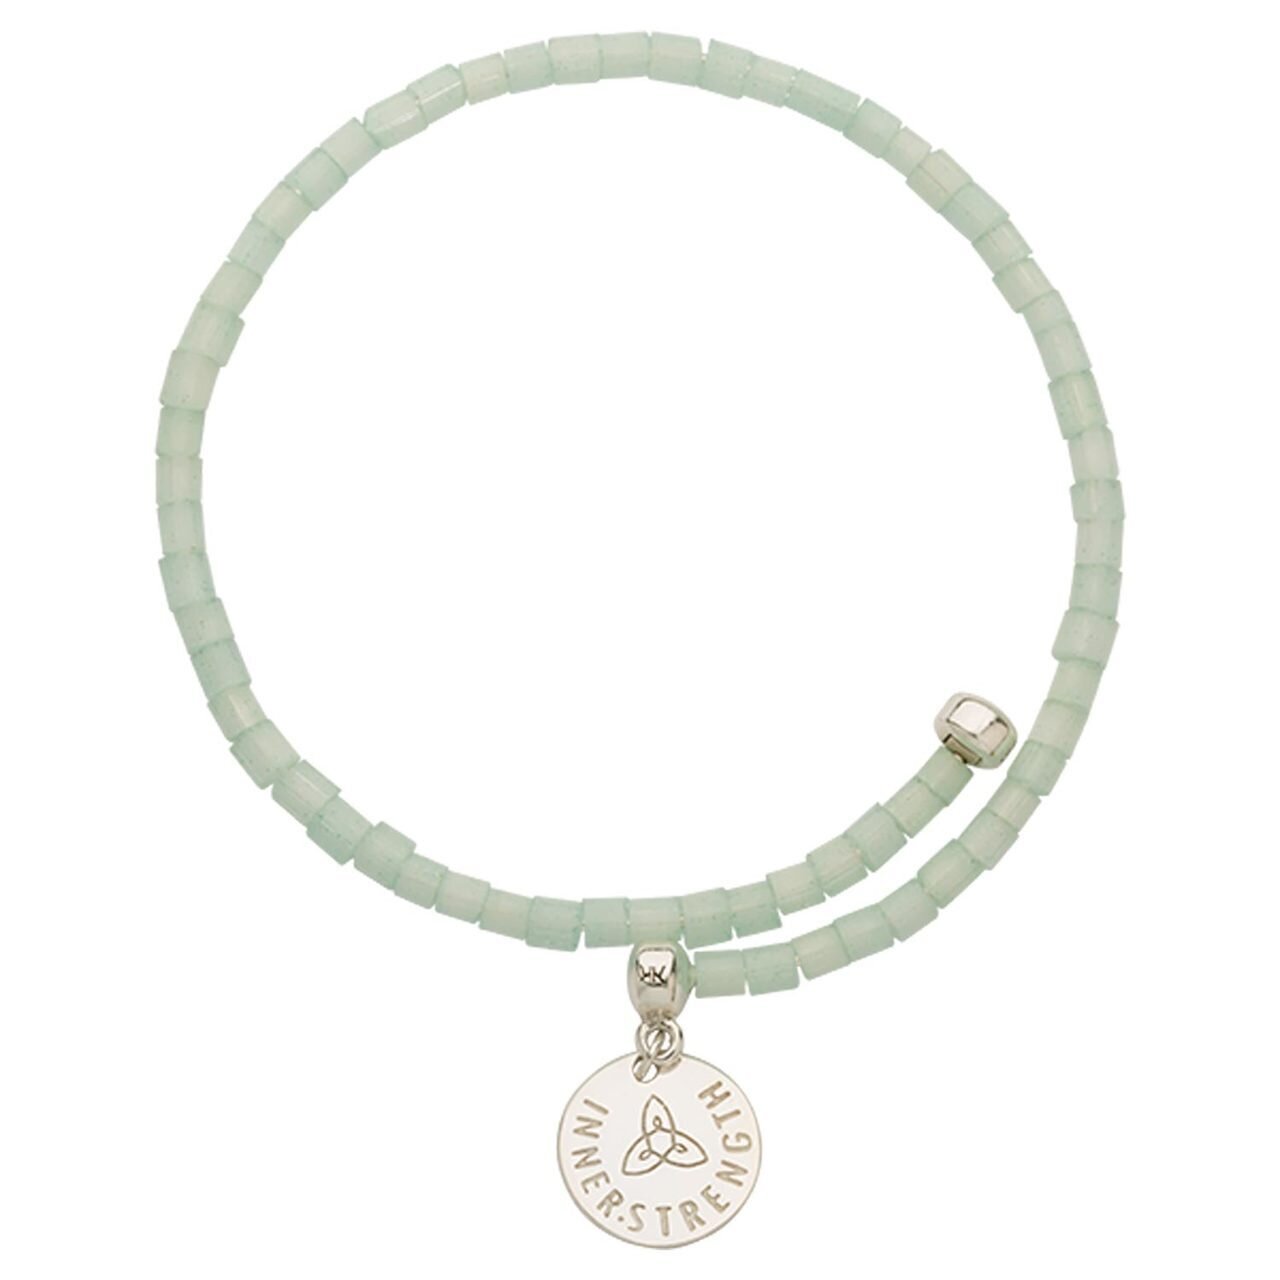 Nikki Lissoni Spiral Bead Bangle Silver-plated with Sea Green Beads In 17cm B1136S17